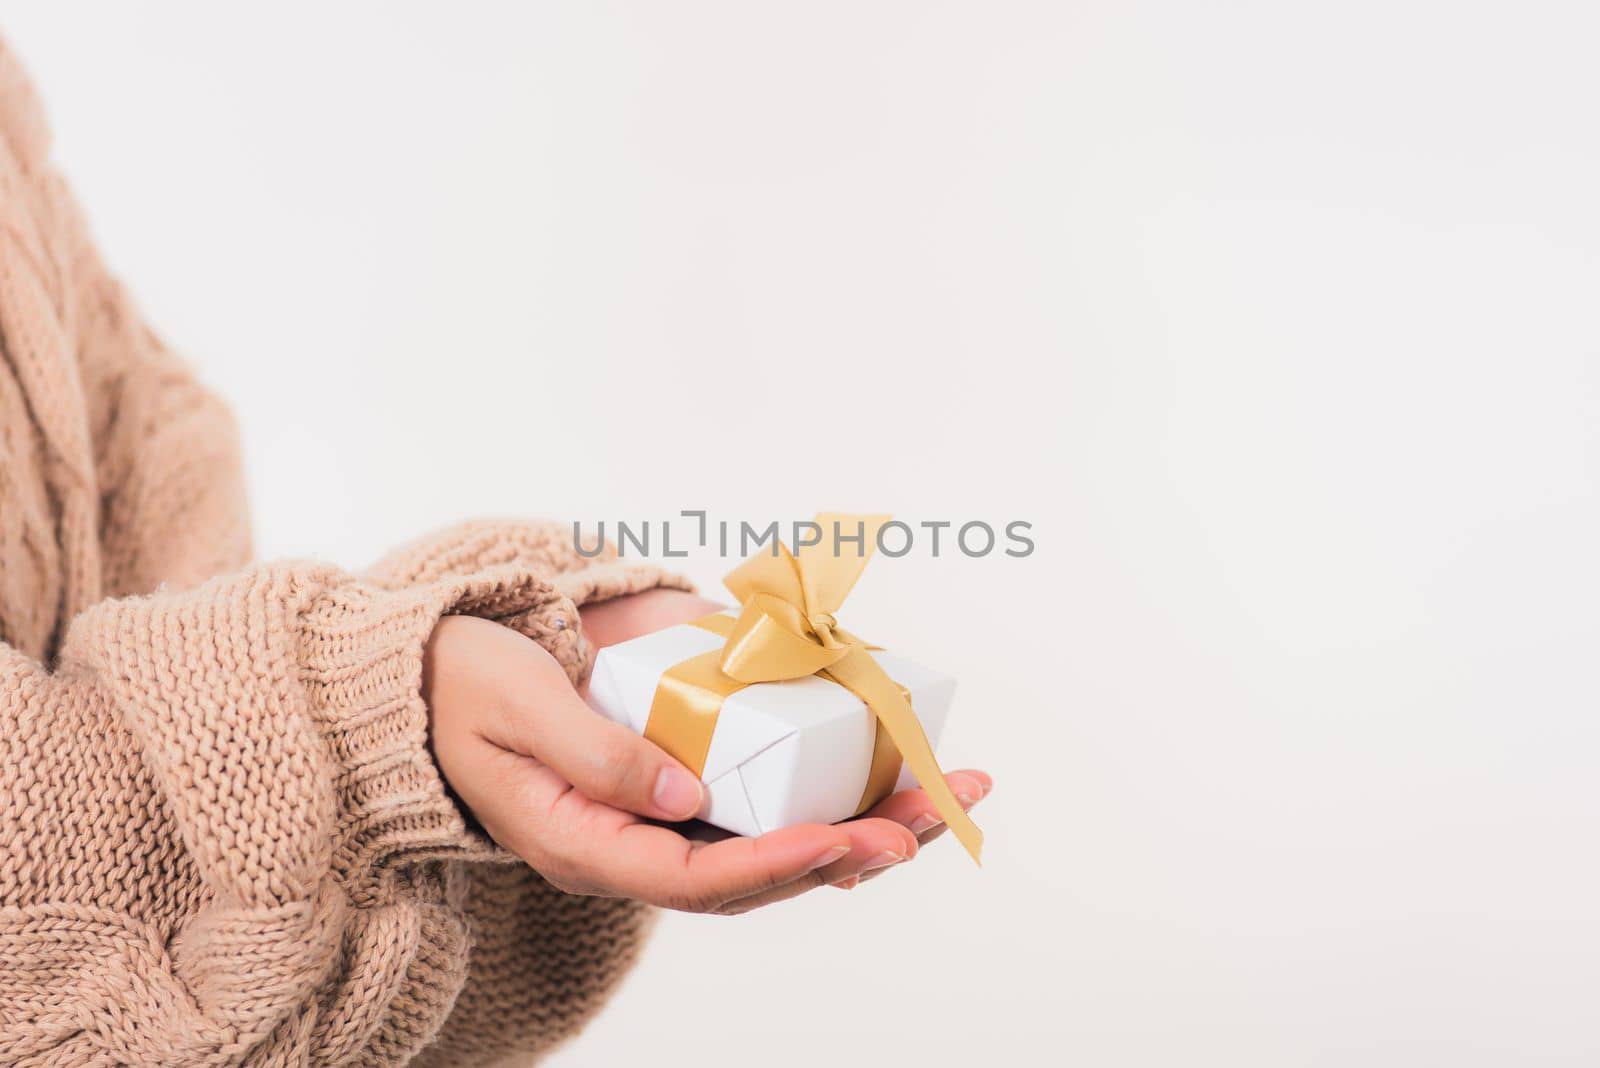 Woman beauty hands holding small gift package box present by Sorapop